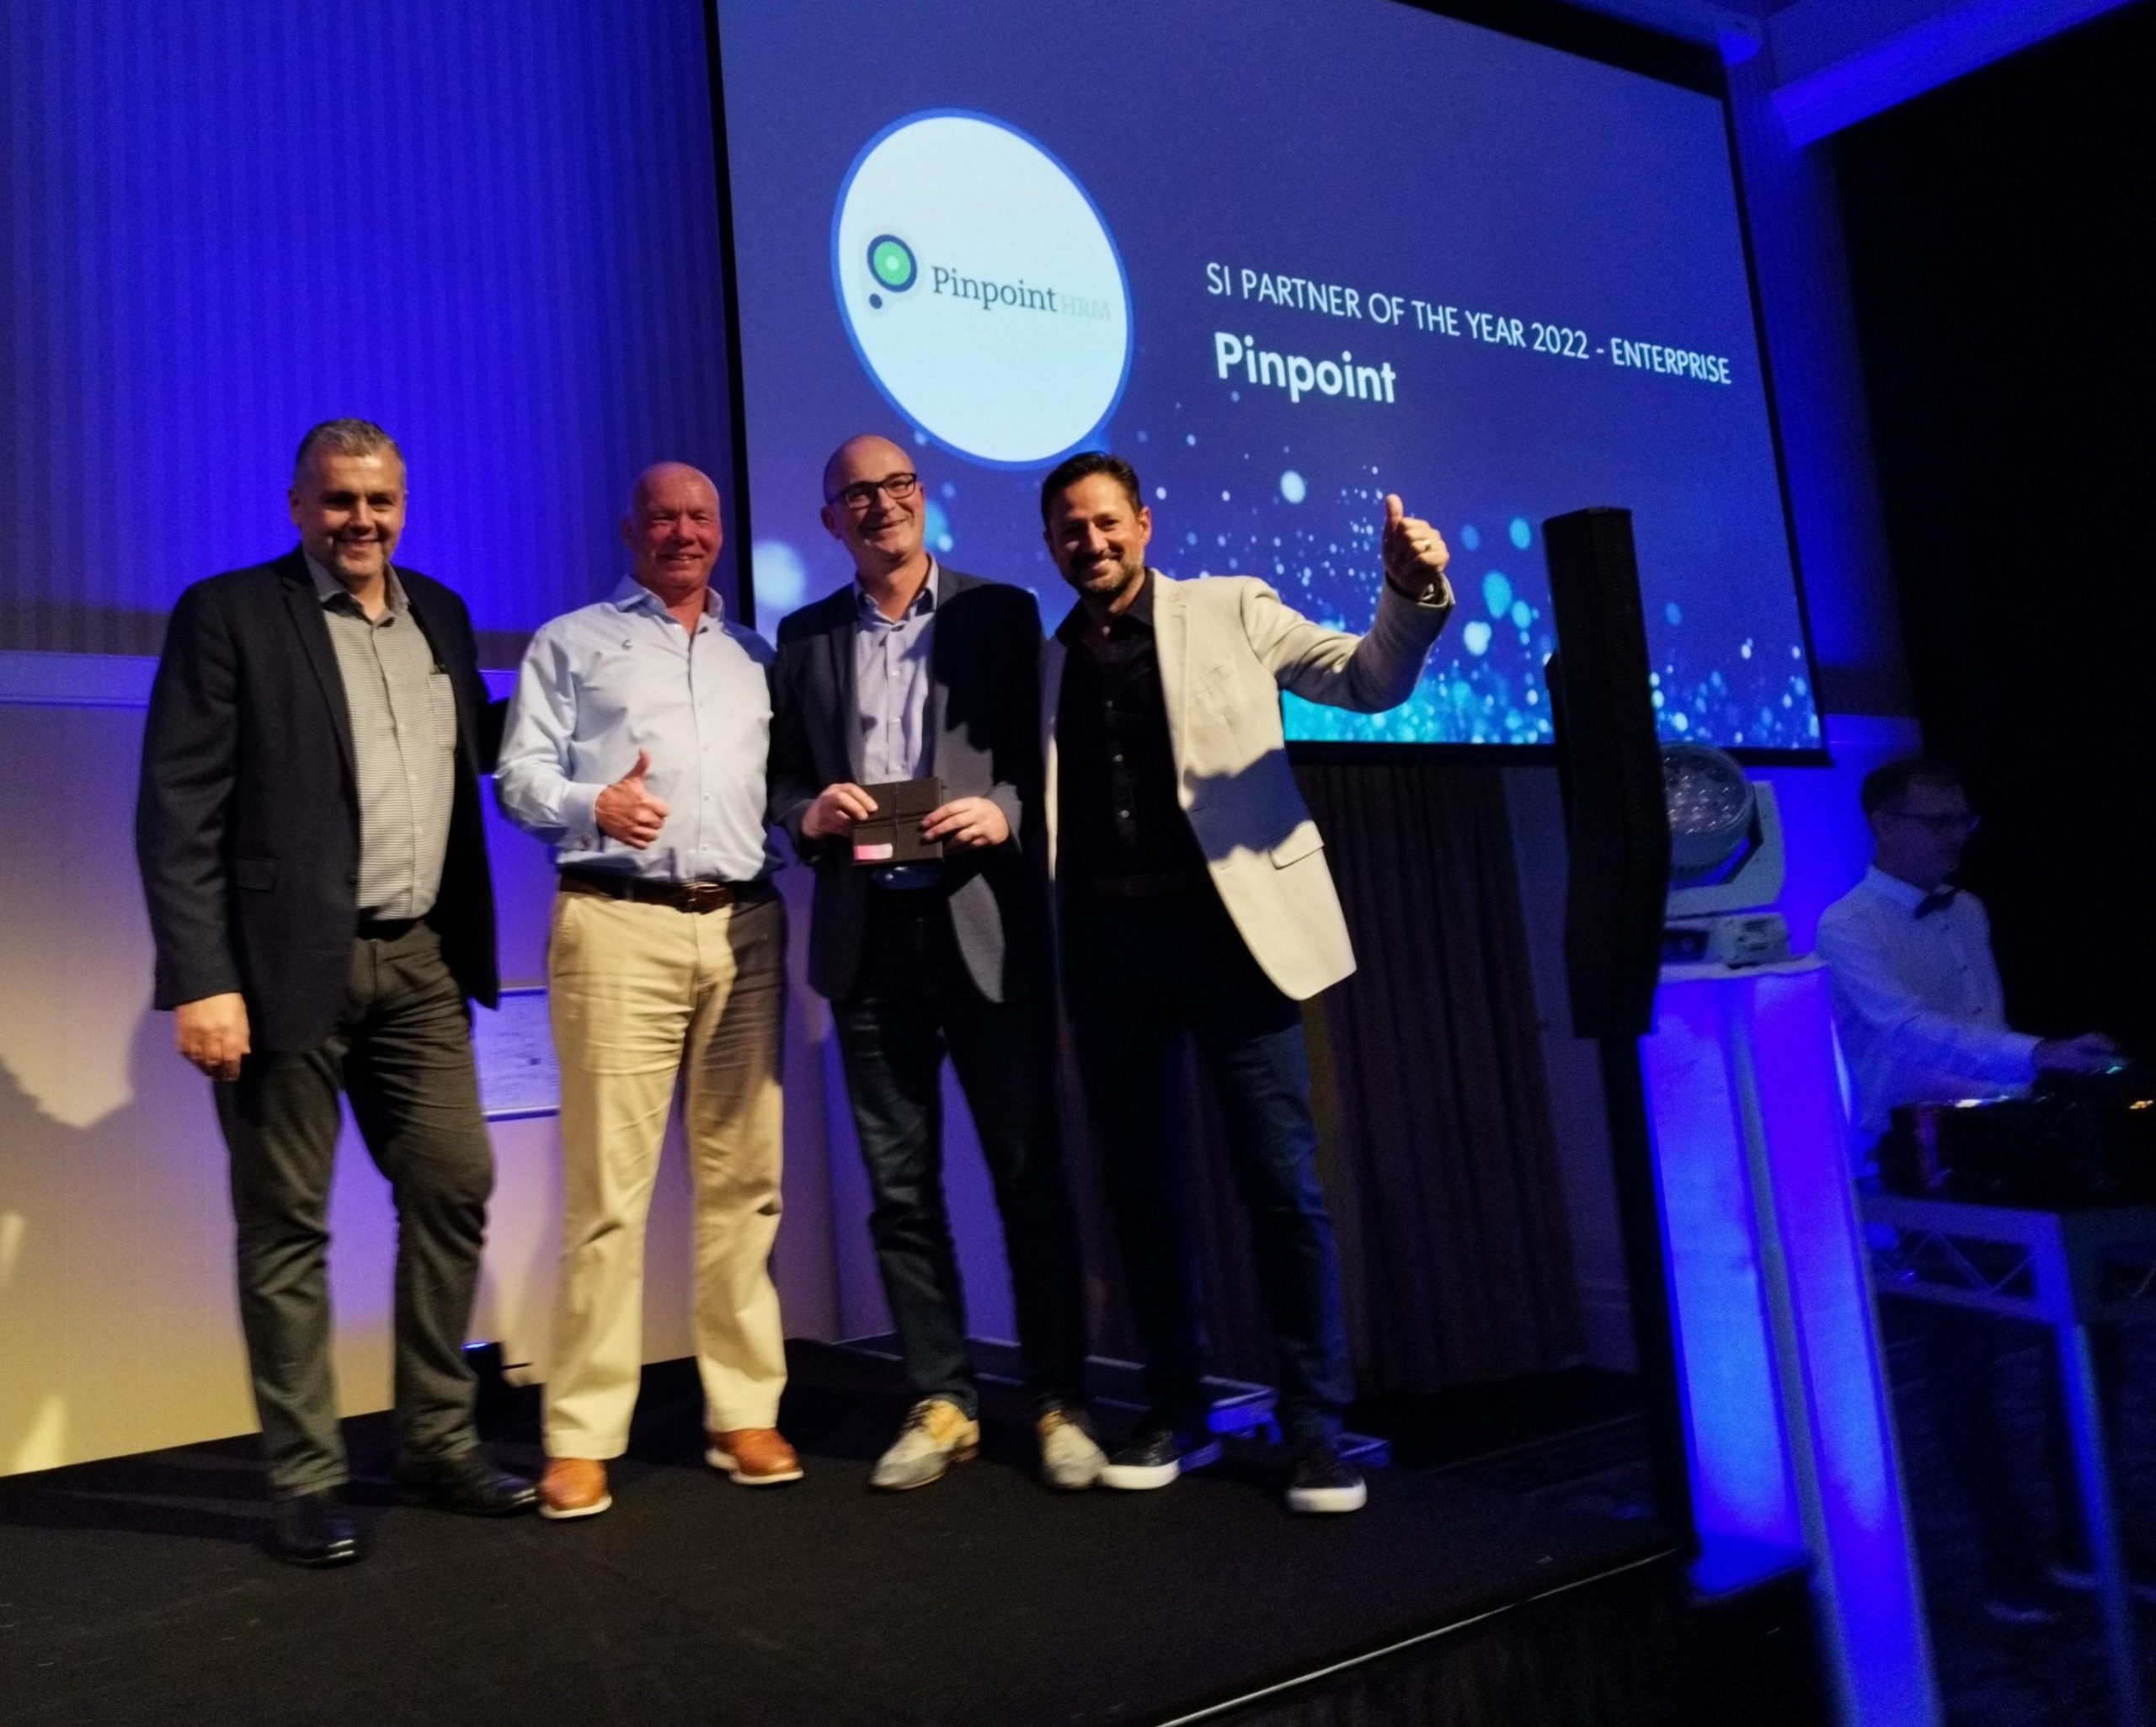 Pinpoint HRM awarded Ceridian ANZ Implementation Partner of the Year 2022